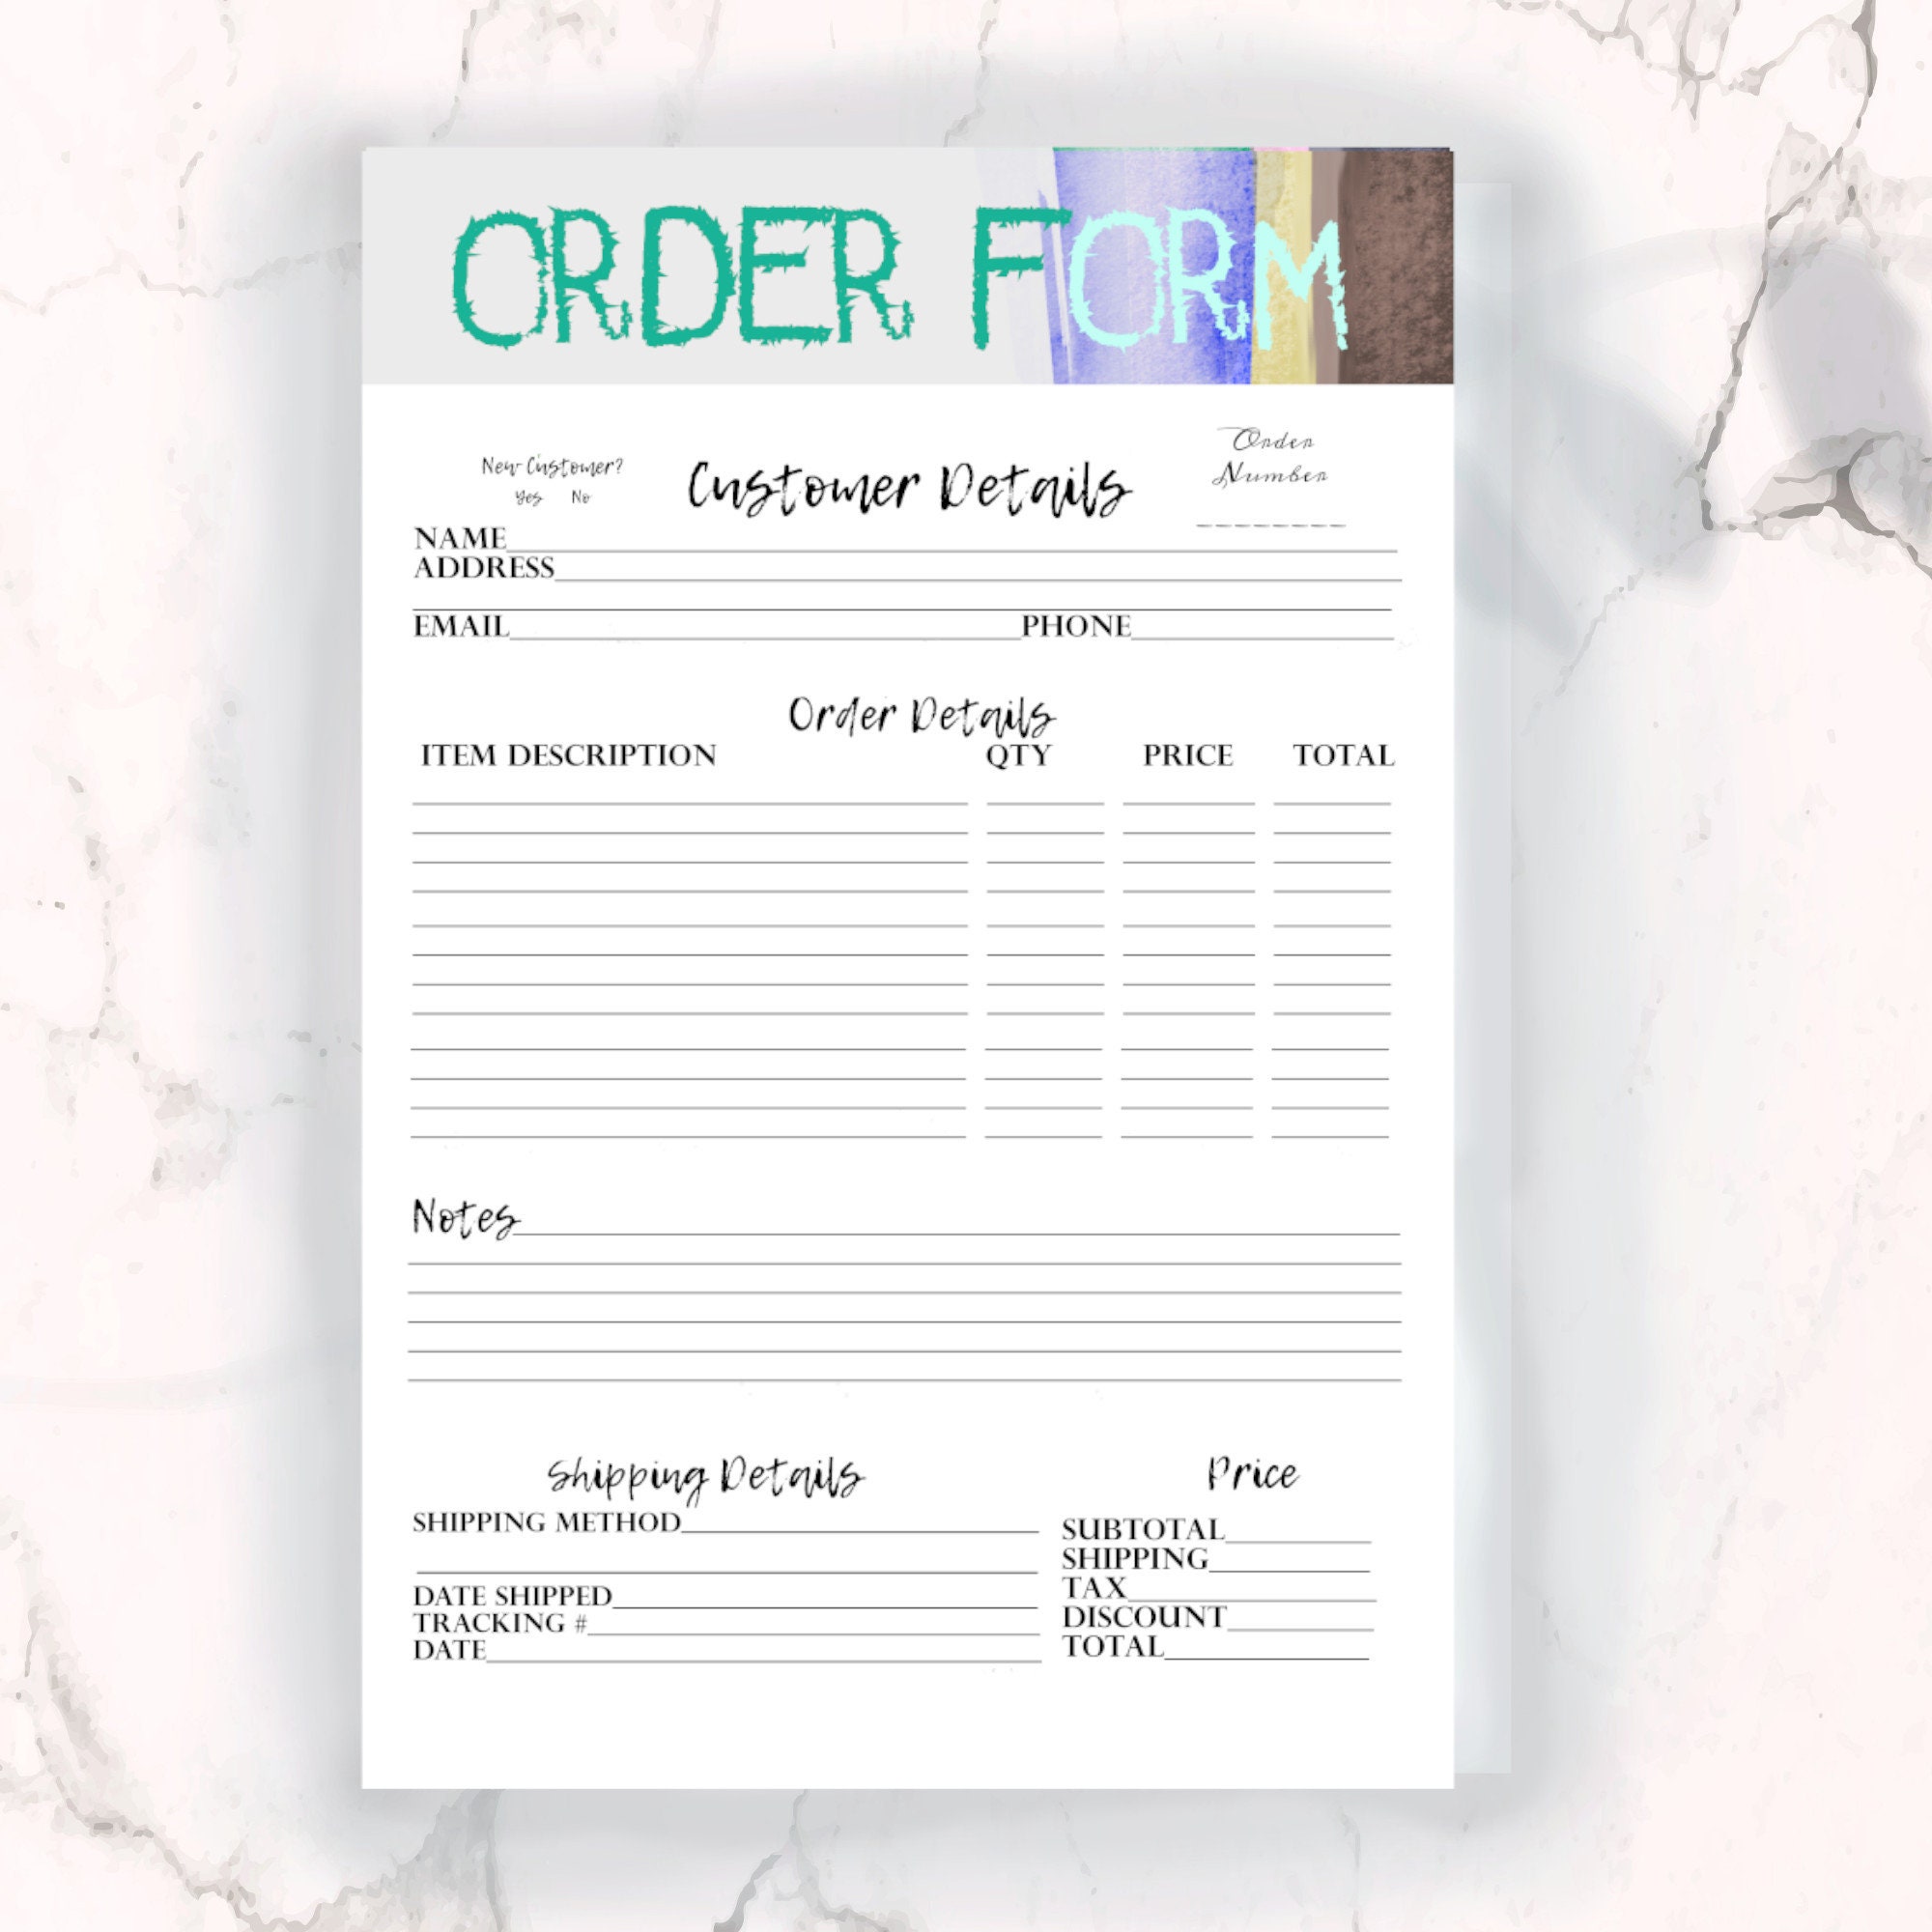 Printable Free Craft Order Form Template